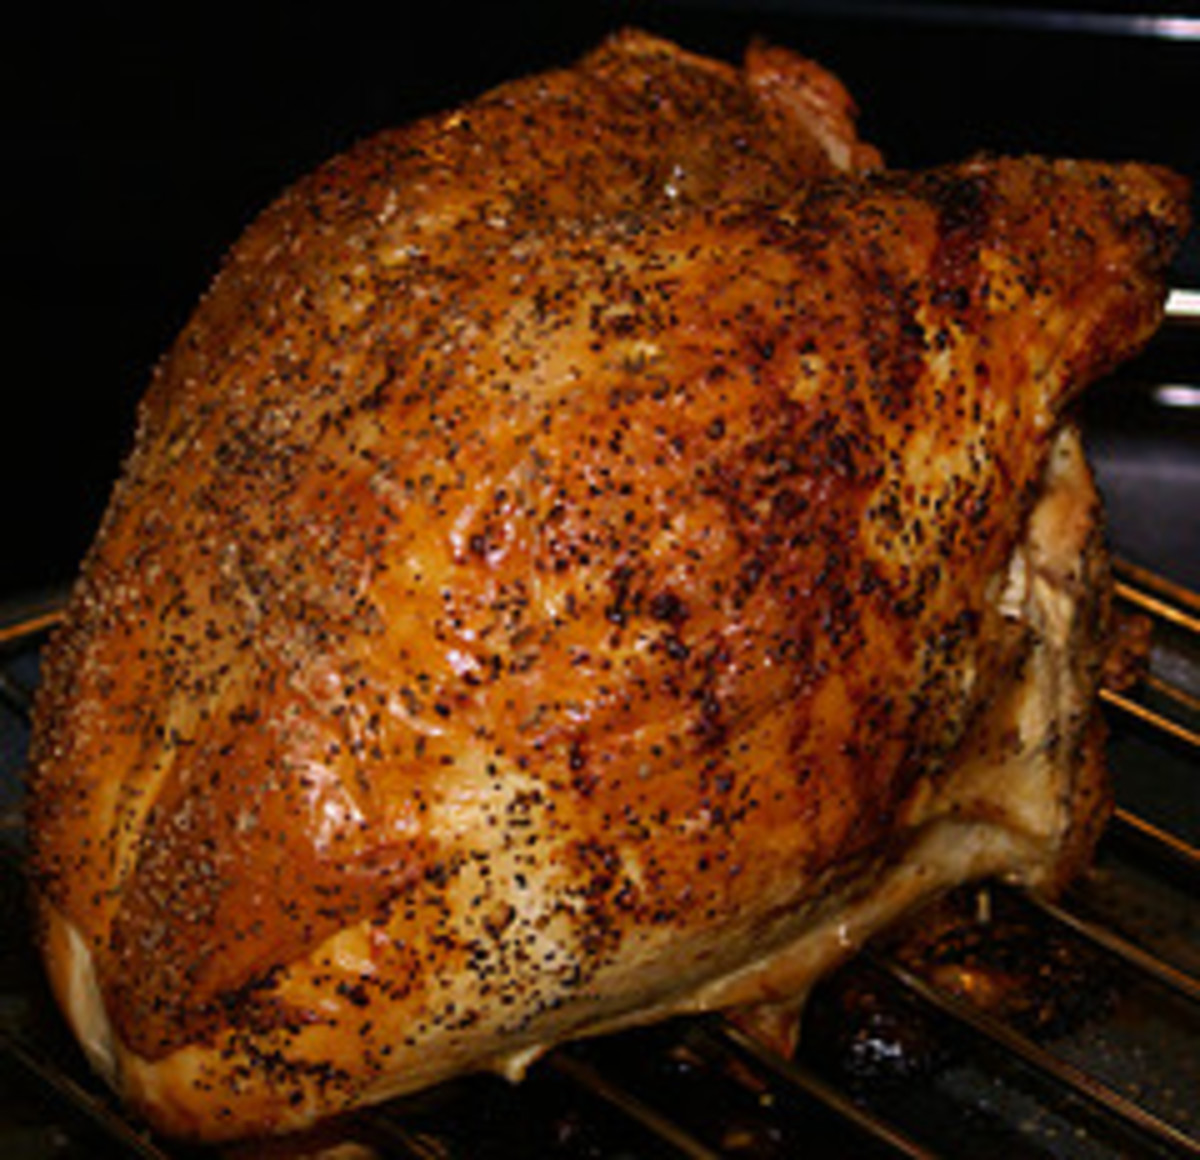 Whole Turkey Breast - Roasted in High Heat Method (Photo courtesy by ninjapoodles from Flickr)